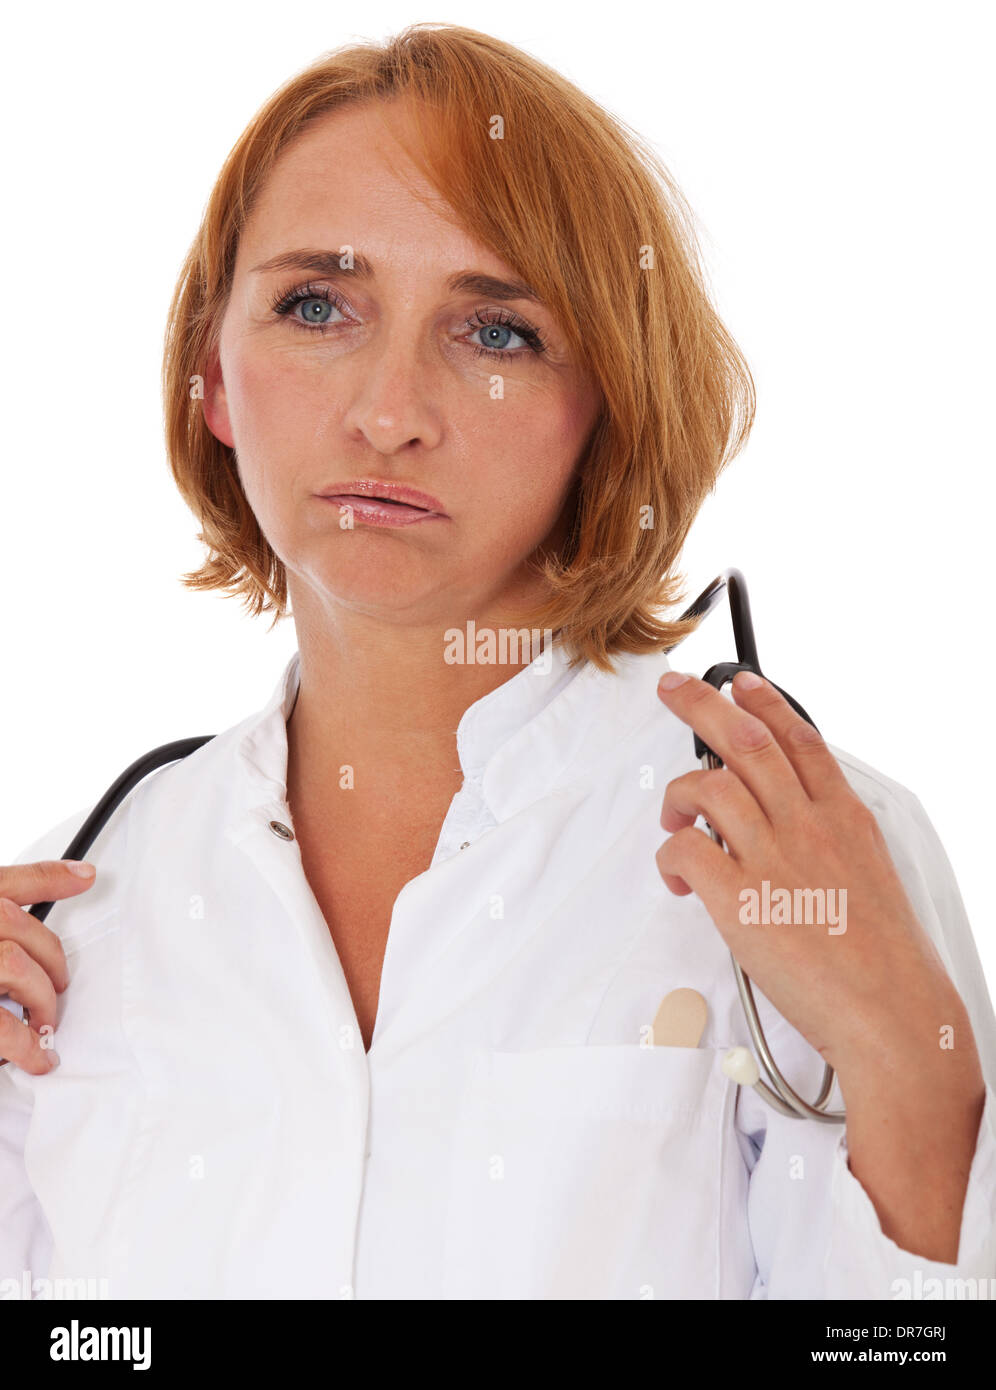 Overworked doctor. All on white background. Stock Photo